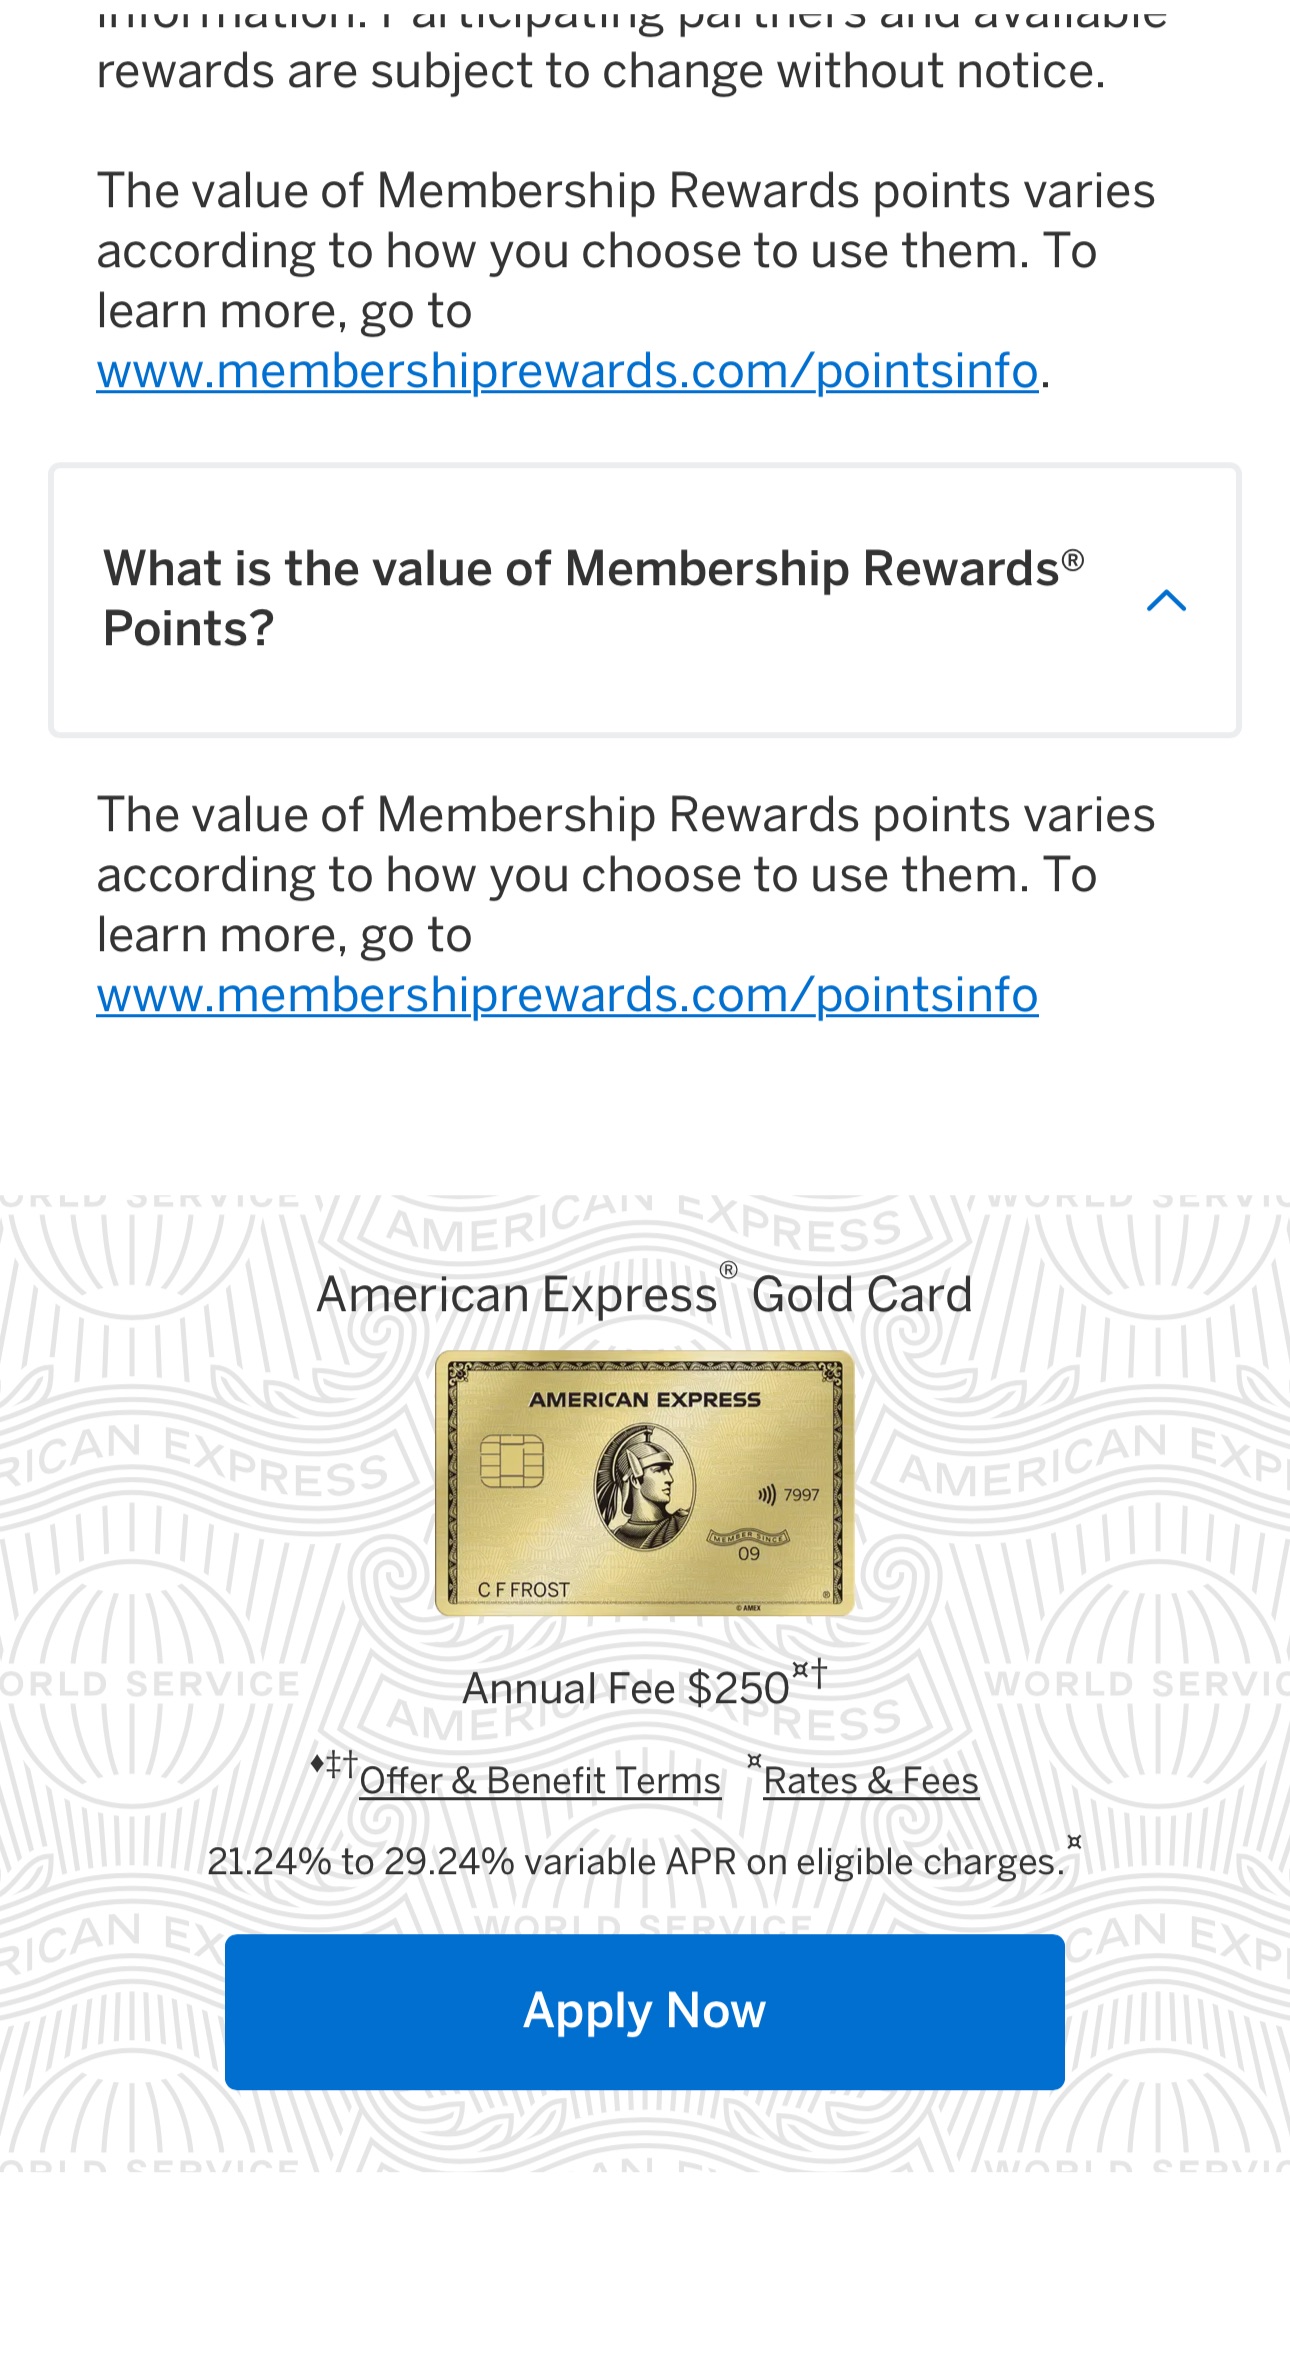 ͨ(Gold/Rose Gold by American Express)